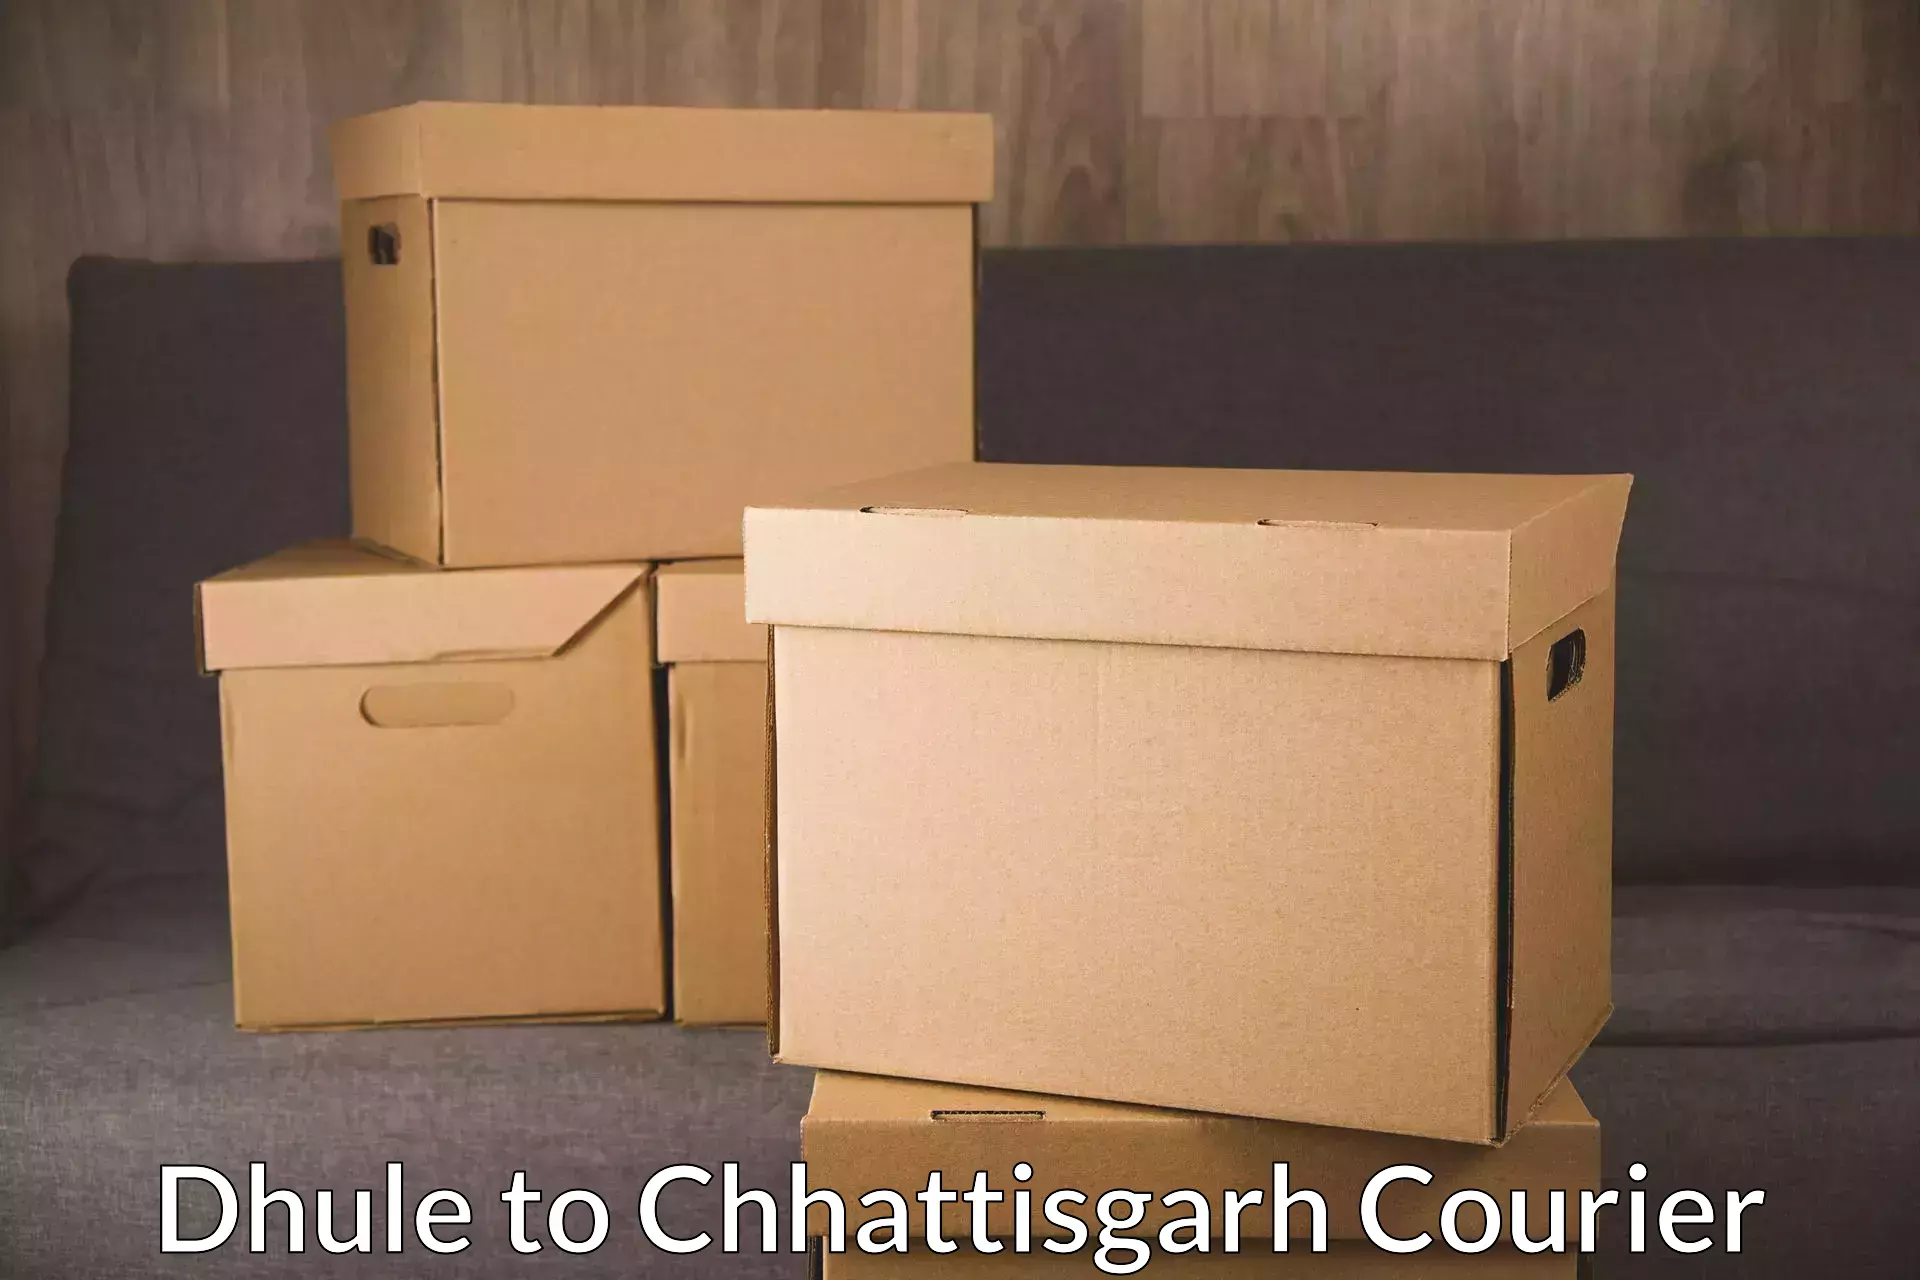 State-of-the-art courier technology Dhule to Chhattisgarh